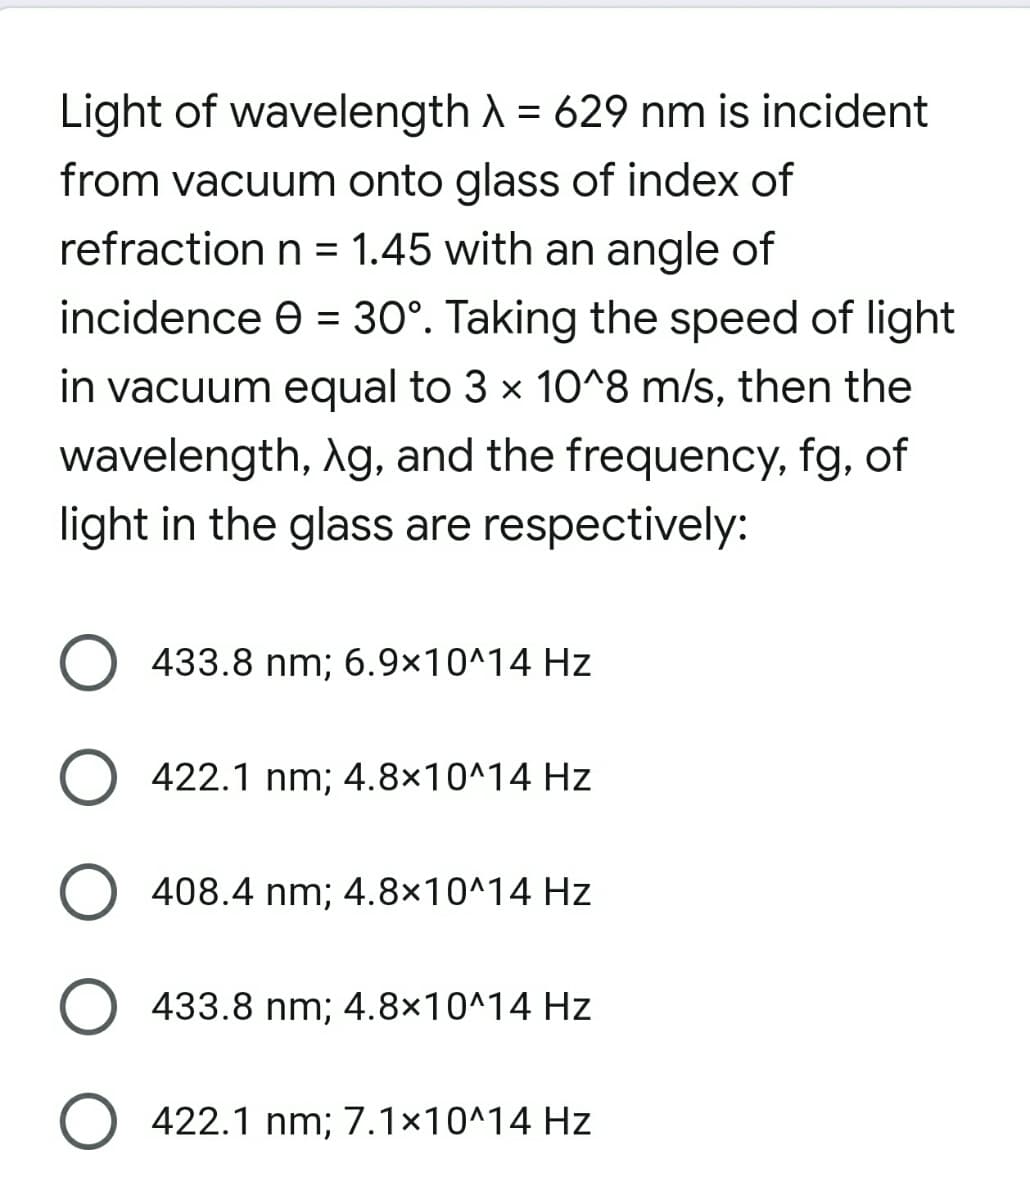 Light of wavelength A = 629 nm is incident
%3D
from vacuum onto glass of index of
refraction n = 1.45 with an angle of
incidence e = 30°. Taking the speed of light
%3D
in vacuum equal to 3 x 10^8 m/s, then the
wavelength, Ag, and the frequency, fg, of
light in the glass are respectively:
O 433.8 nm; 6.9×10^14 Hz
O 422.1 nm; 4.8×10^14 Hz
O 408.4 nm; 4.8×10^14 Hz
433.8 nm; 4.8×10^14 Hz
O 422.1 nm; 7.1×10^14 Hz
